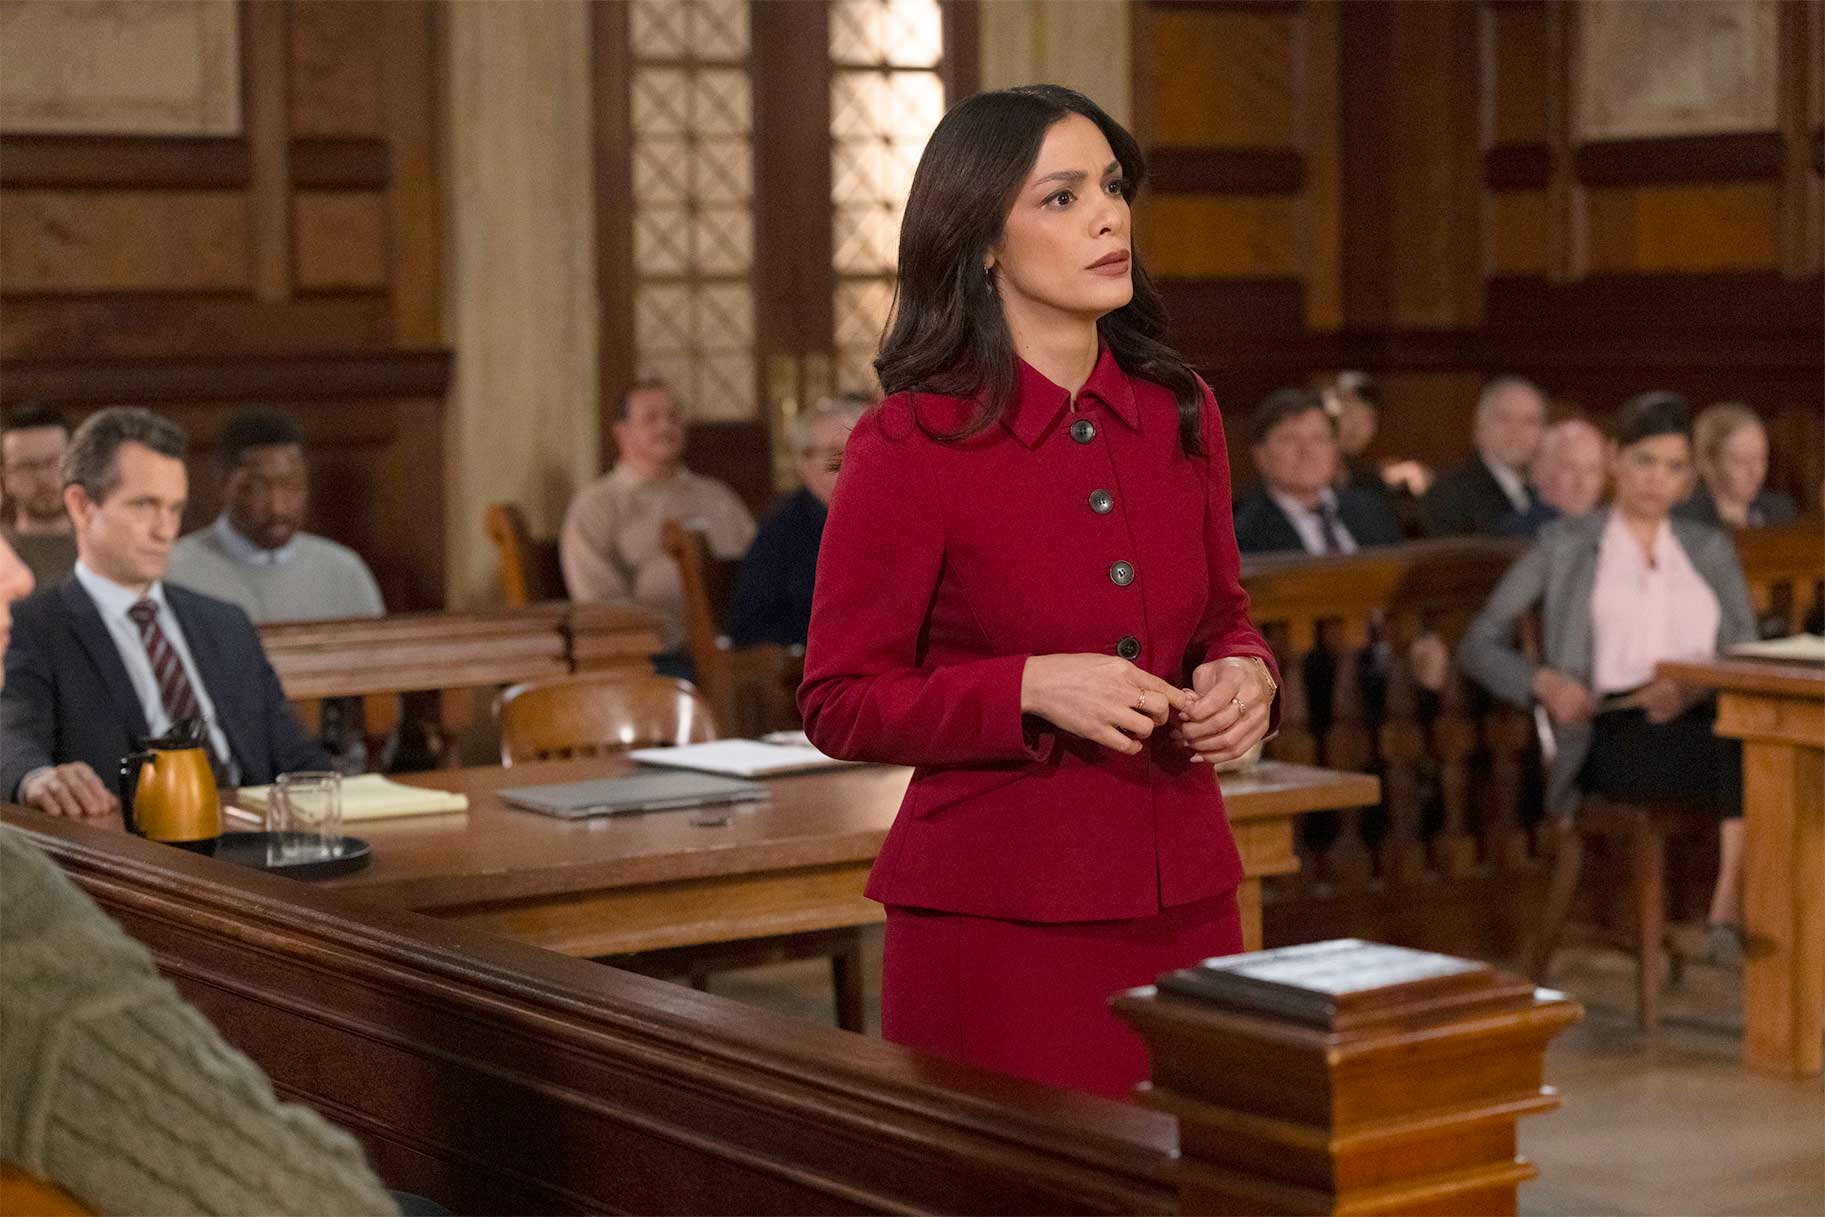 Samantha Maroun Was Accused of Something Intense on the Latest Law & Order